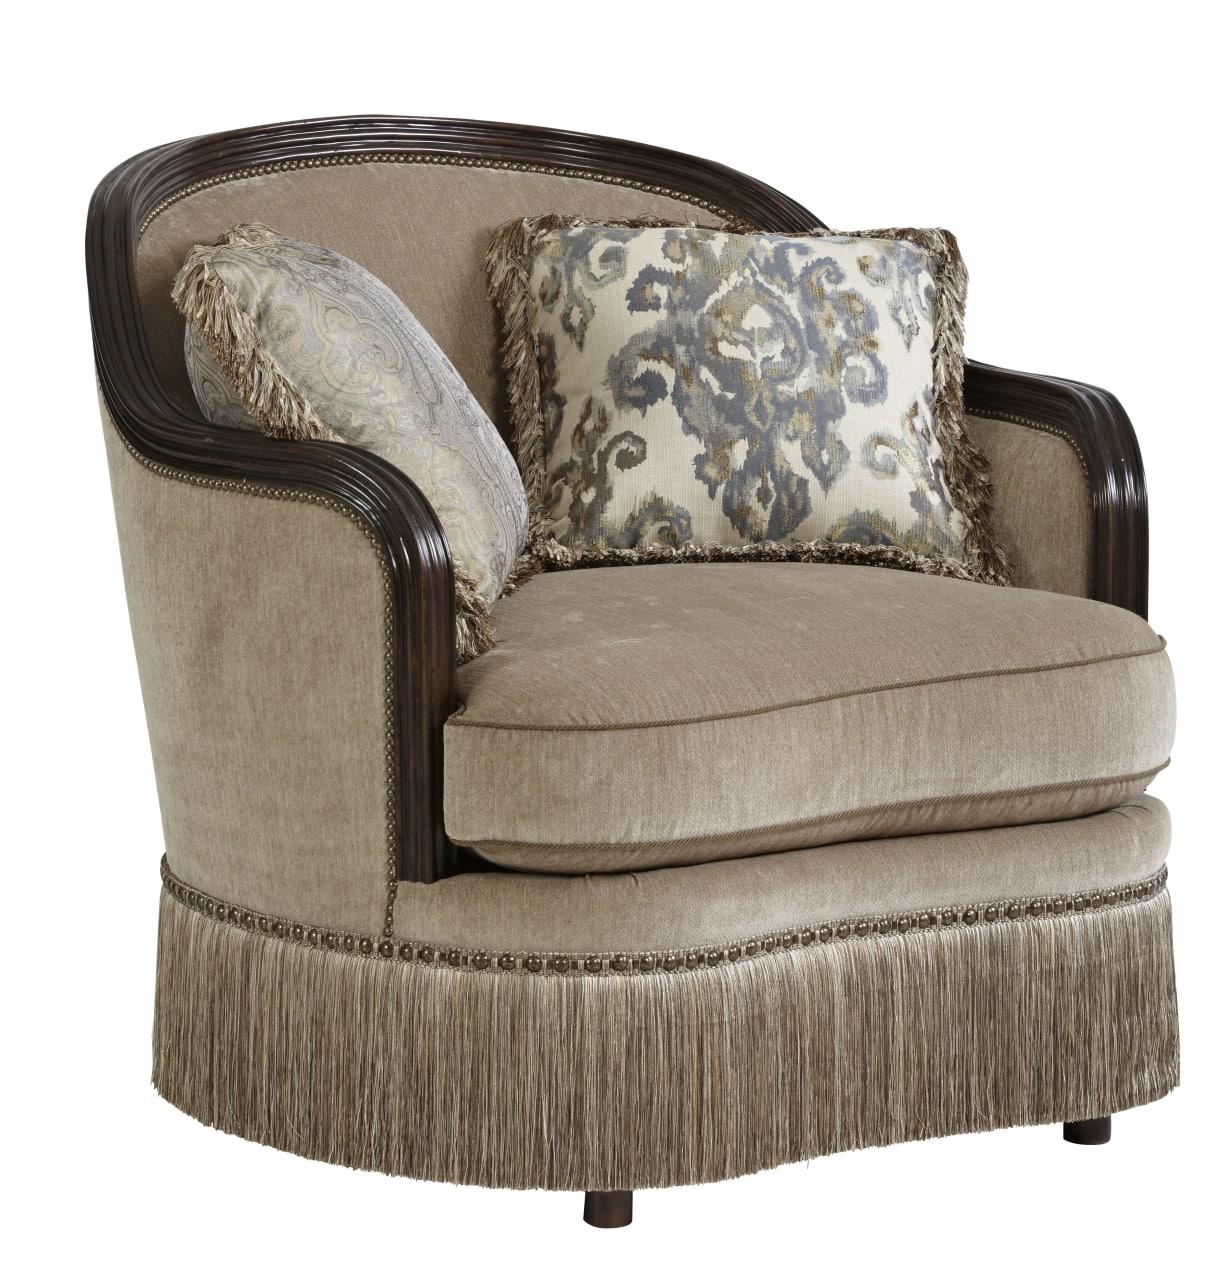 Contemporary Living Room Chair Giovanna 509503-5327AB in Tan Fabric